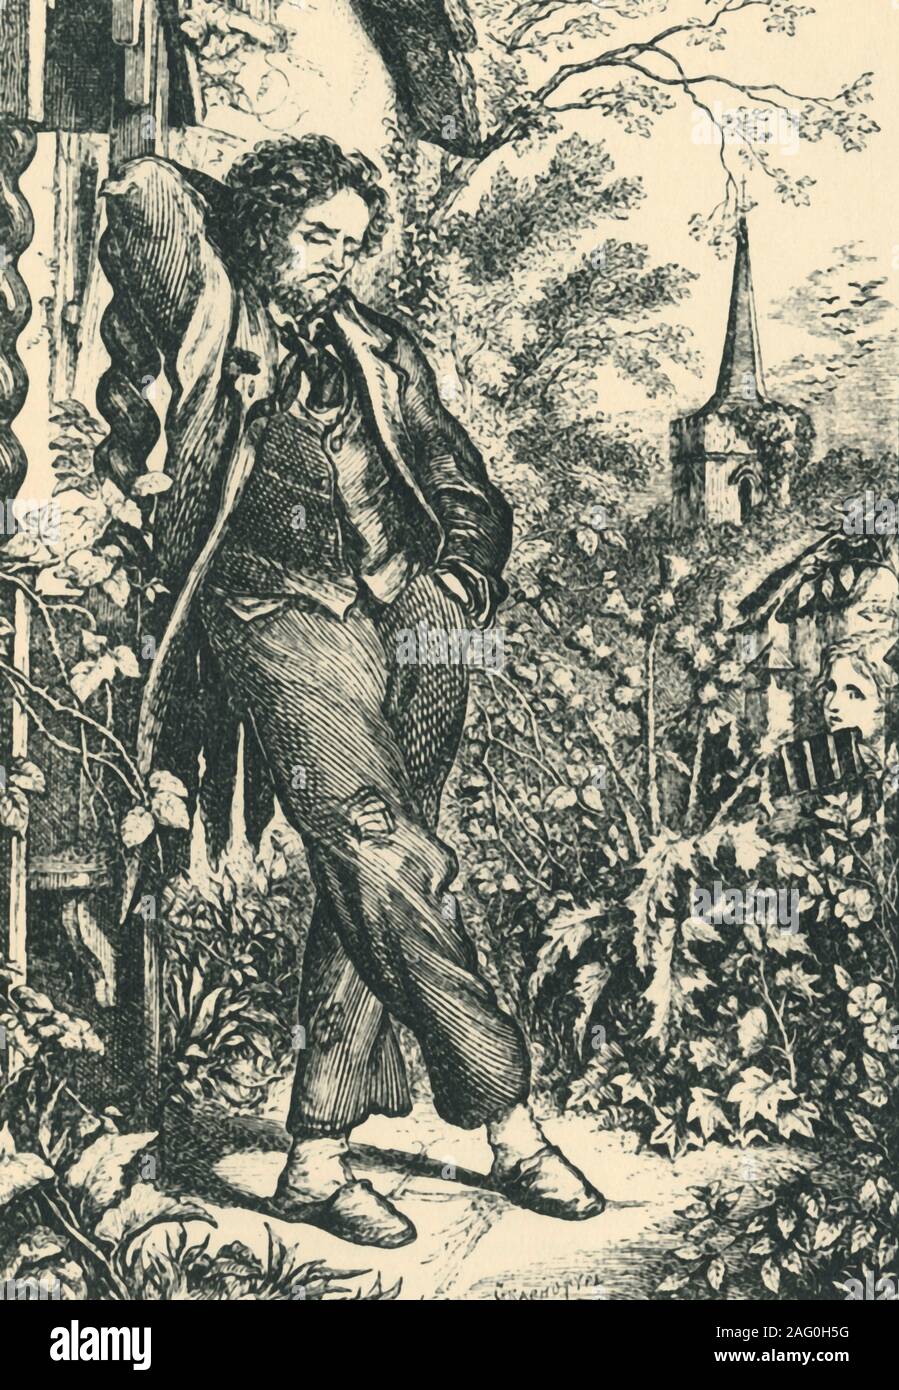 'The Sluggard', 19th century, (1943). A scruffy man lounges against a wall. His overgrown garden is full of thistles, and the church spire in the distance is choked with ivy. Illustration  from Watts's &quot;Divine and Moral Songs for Children&quot;, first published in 1720. Published in &quot;The English Bible&quot;, by Sir Herbert Grierson. [Collins, London, 1943] Stock Photo